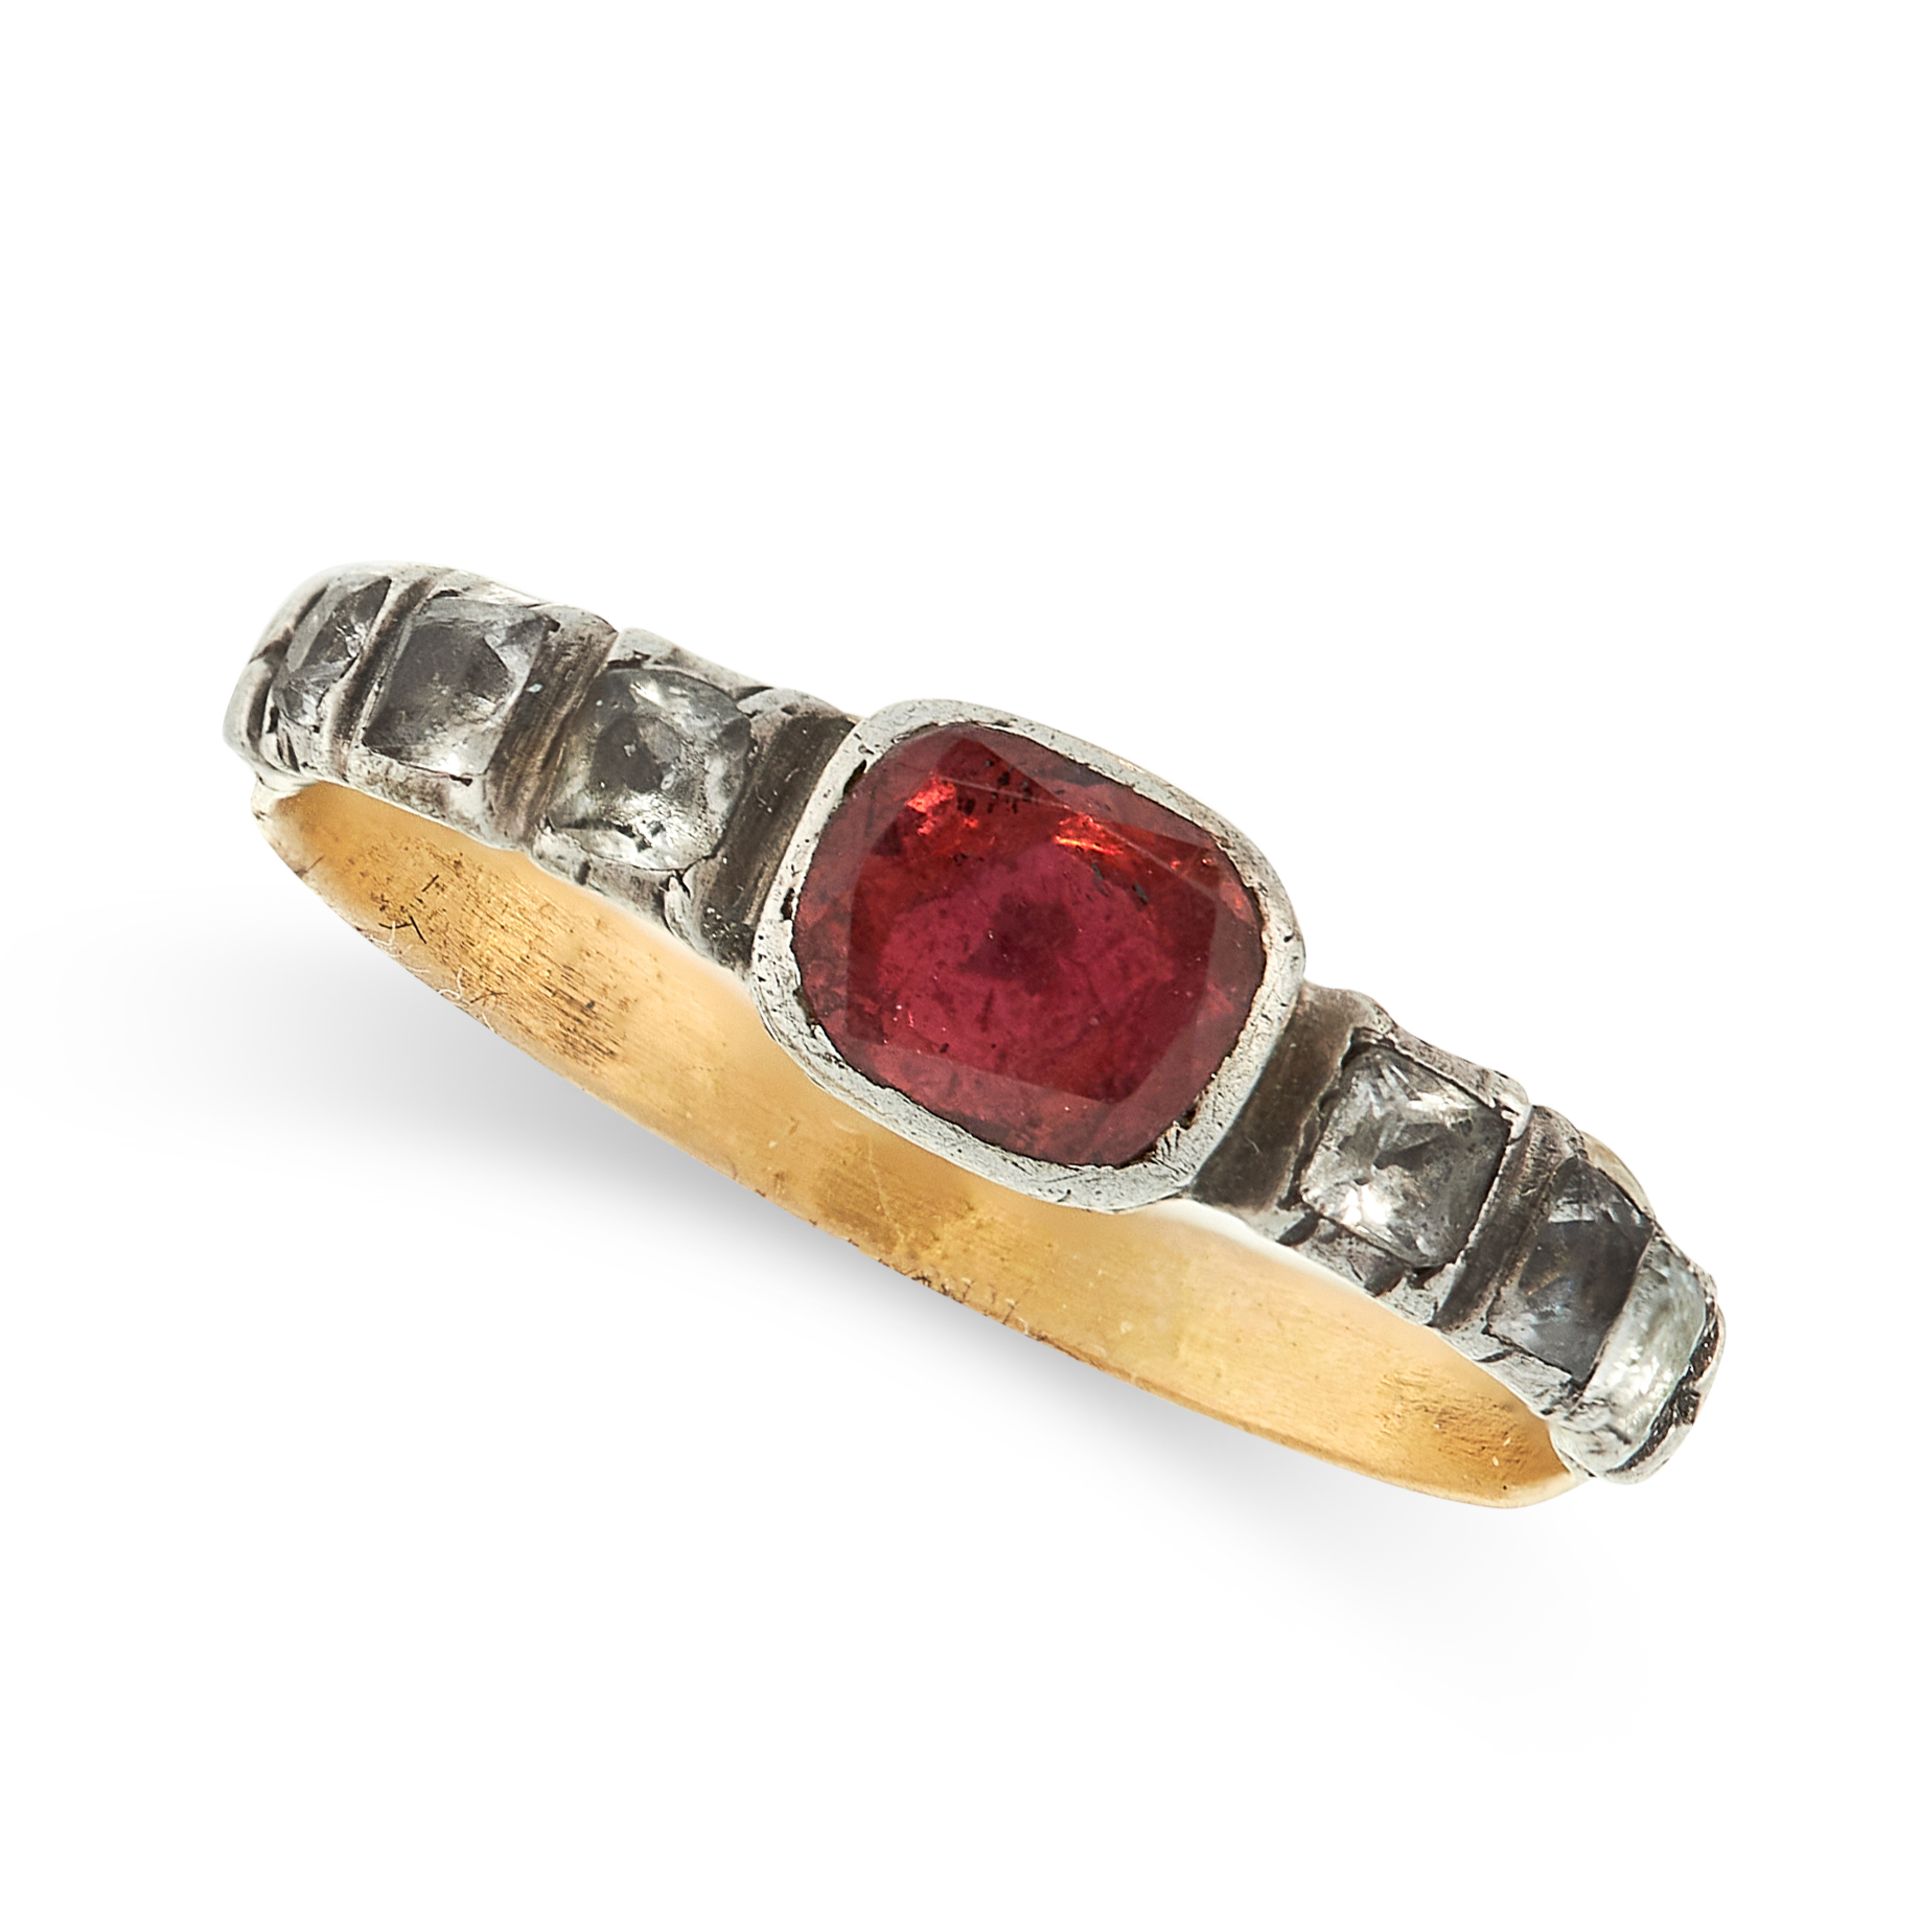 ANTIQUE GARNET AND PASTE RING in yellow gold and silver, set with a cushion cut garnet, between